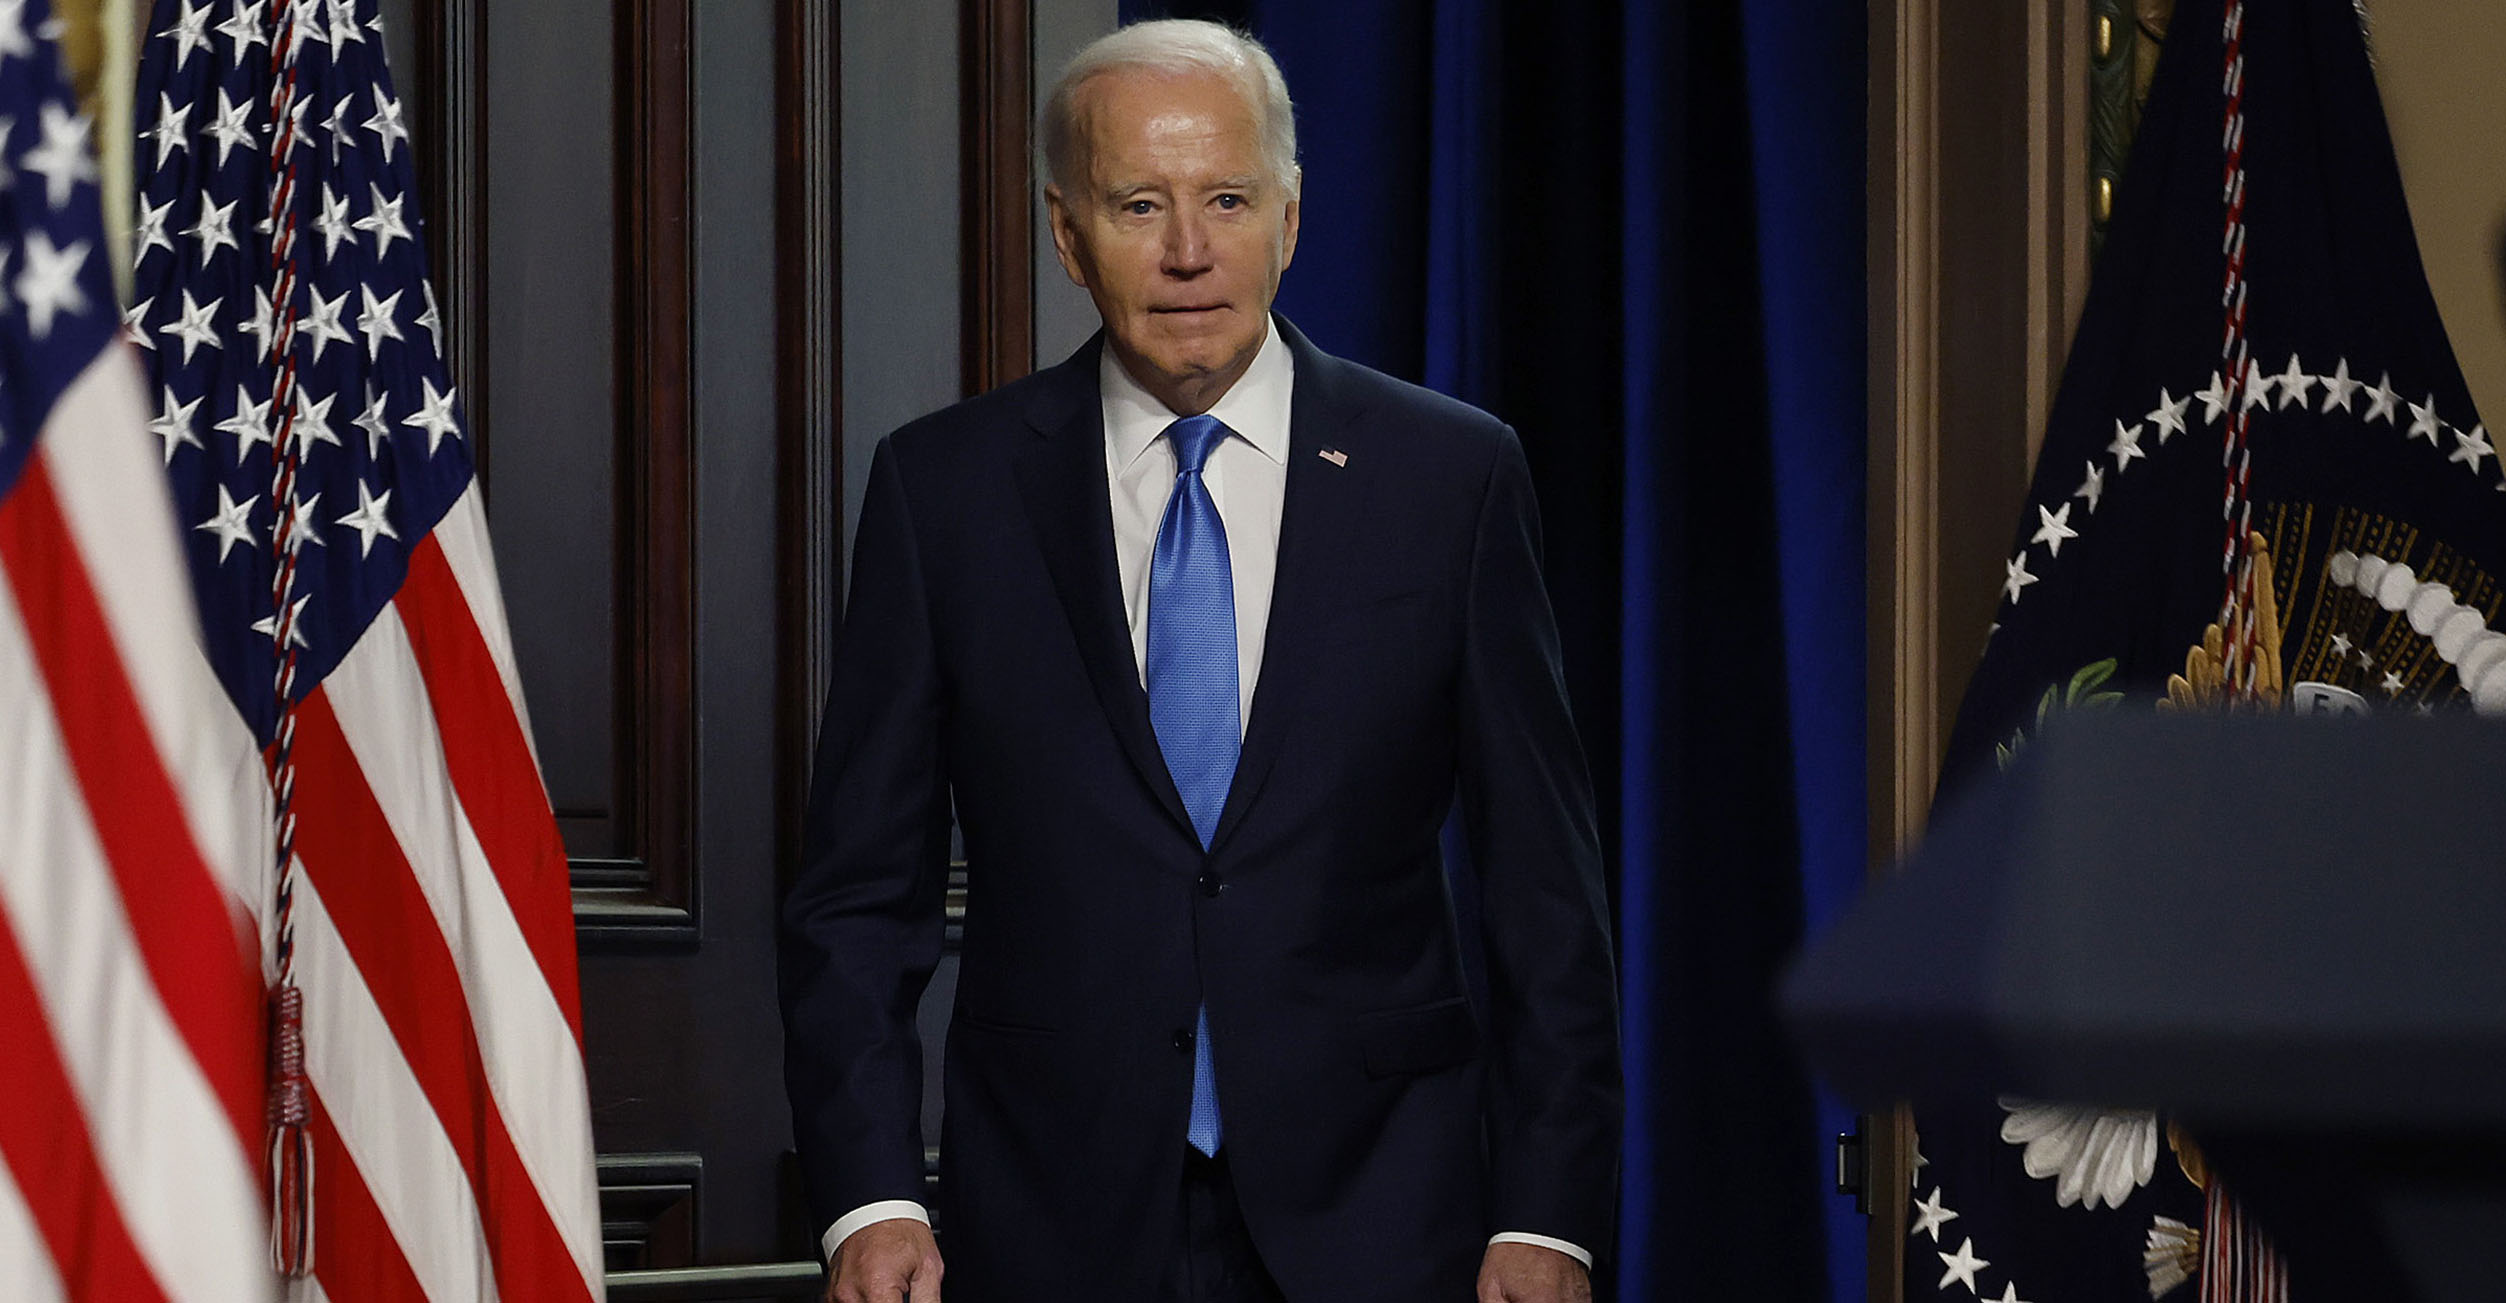 Biden Could Be Impeached for Bribery, House GOP Members Say